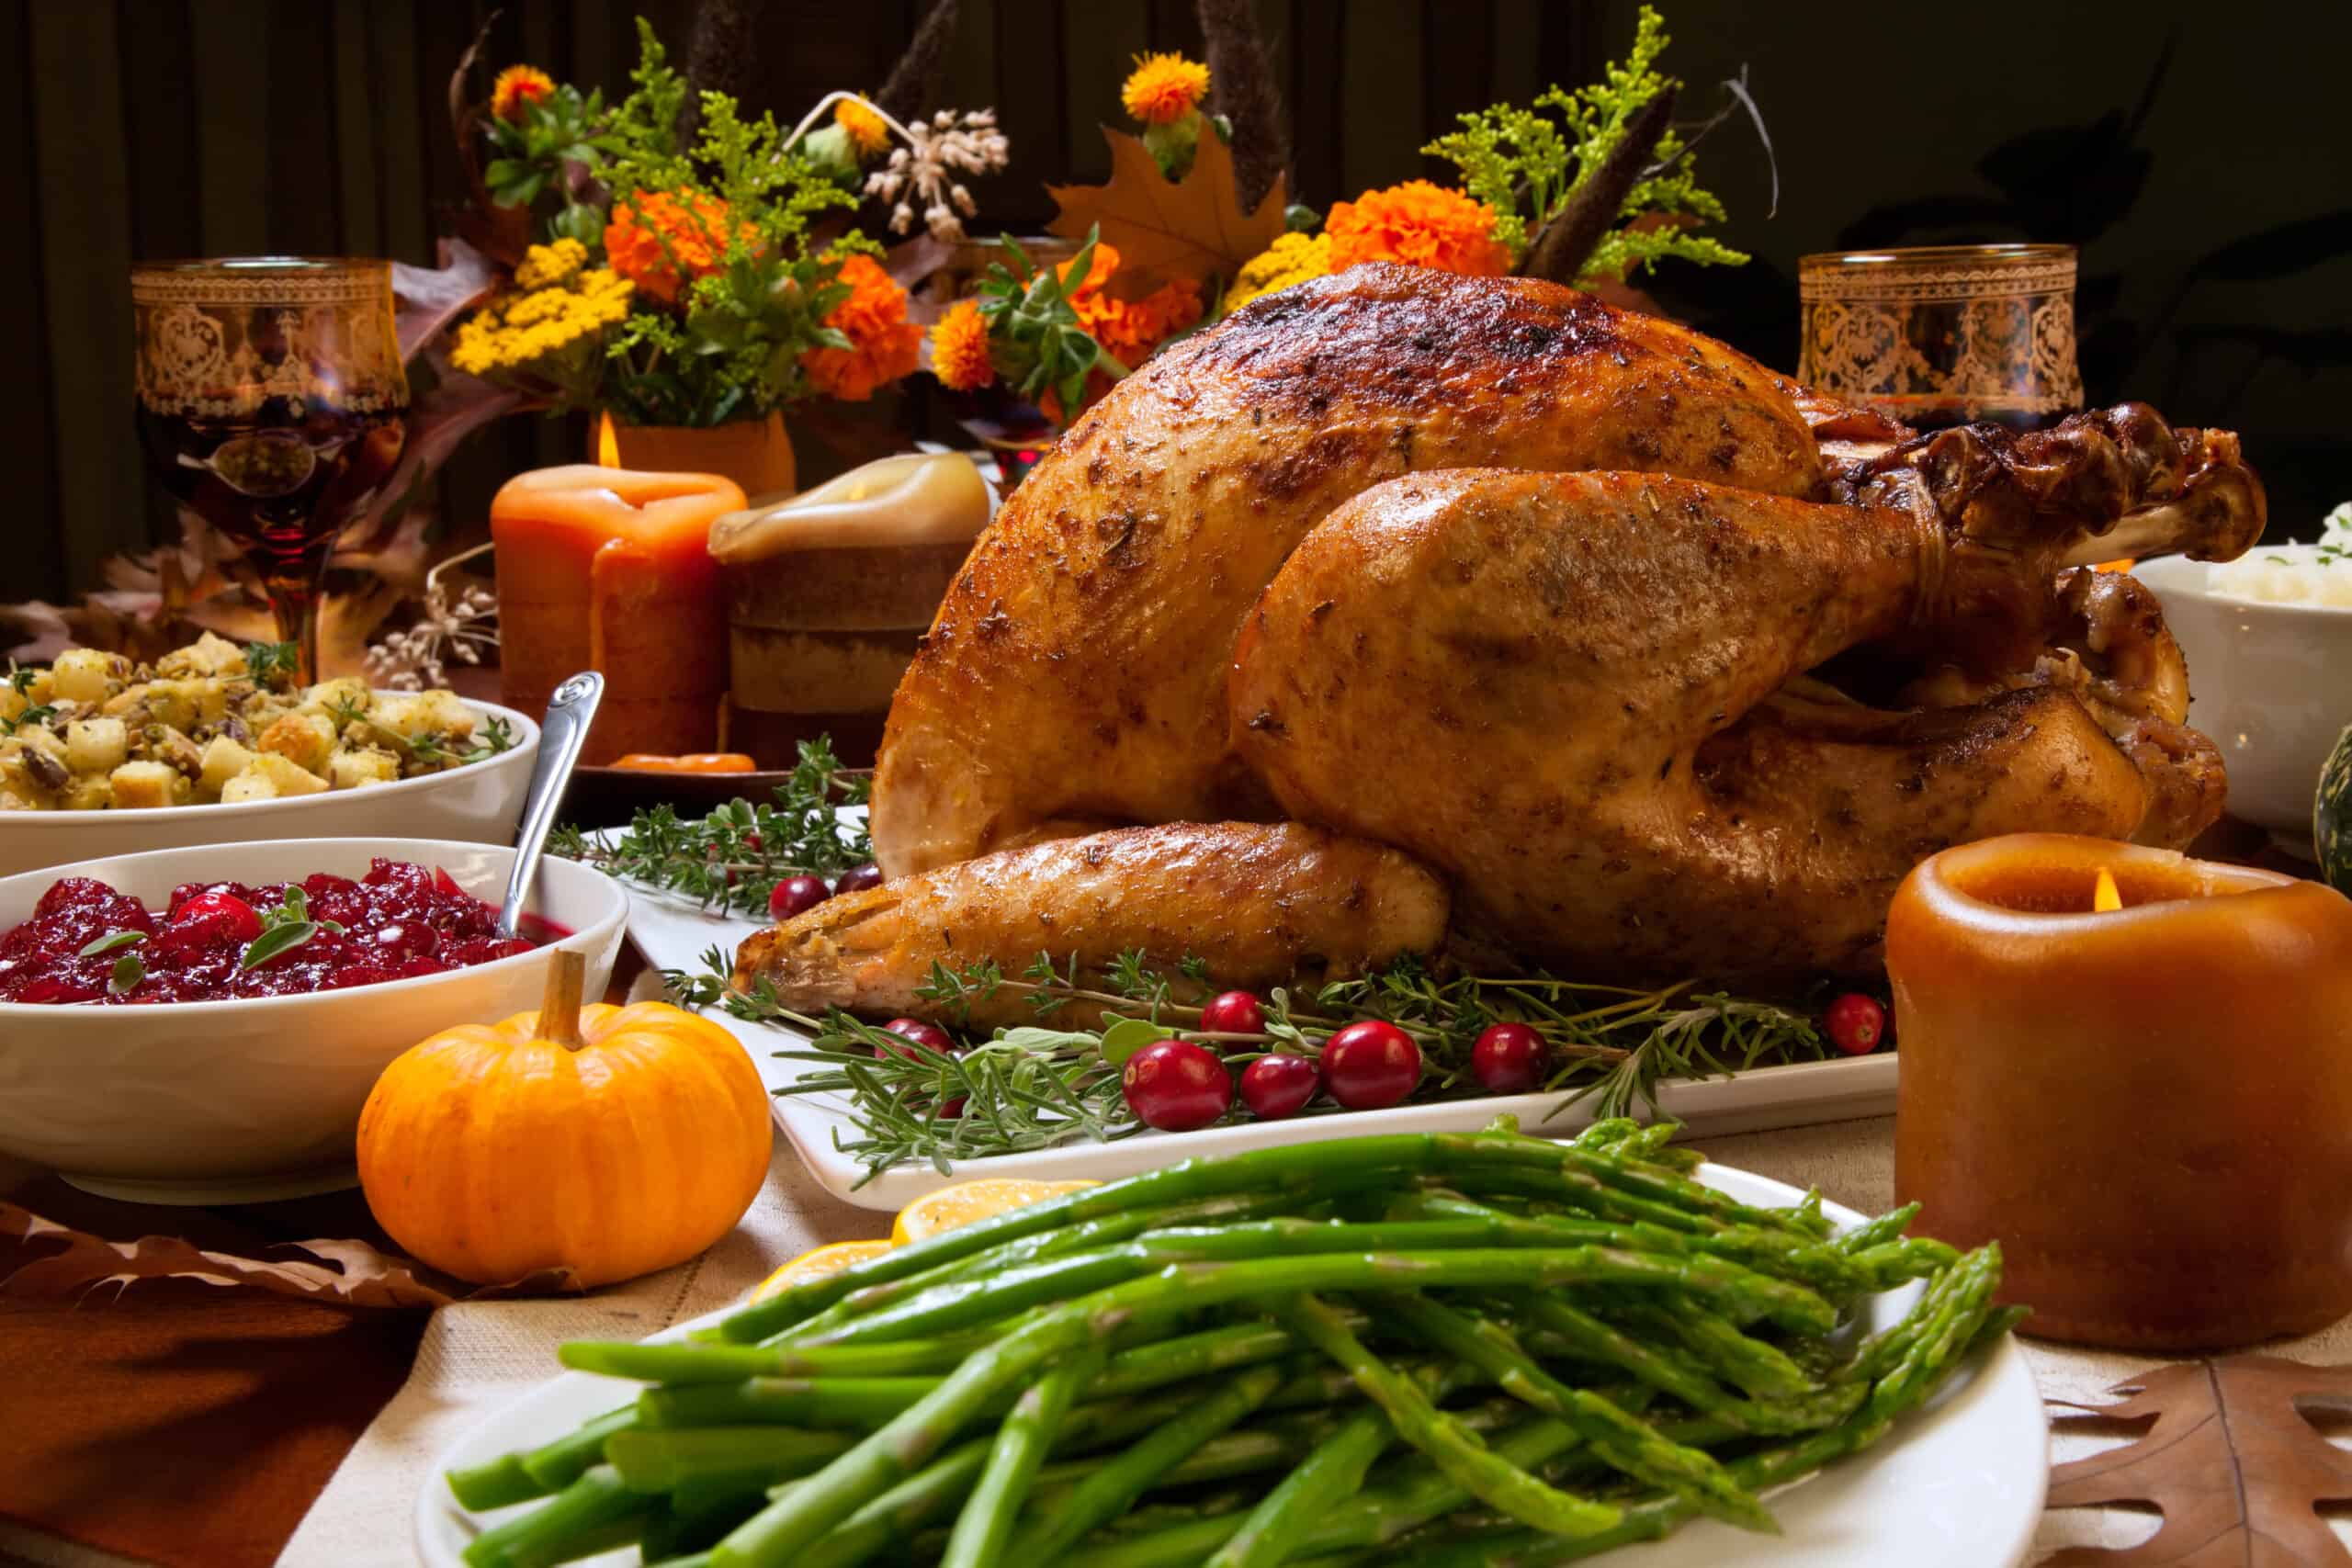 Roast Turkey with Herbal Rub on a holiday table with fresh green beans and mini pumpkin decor